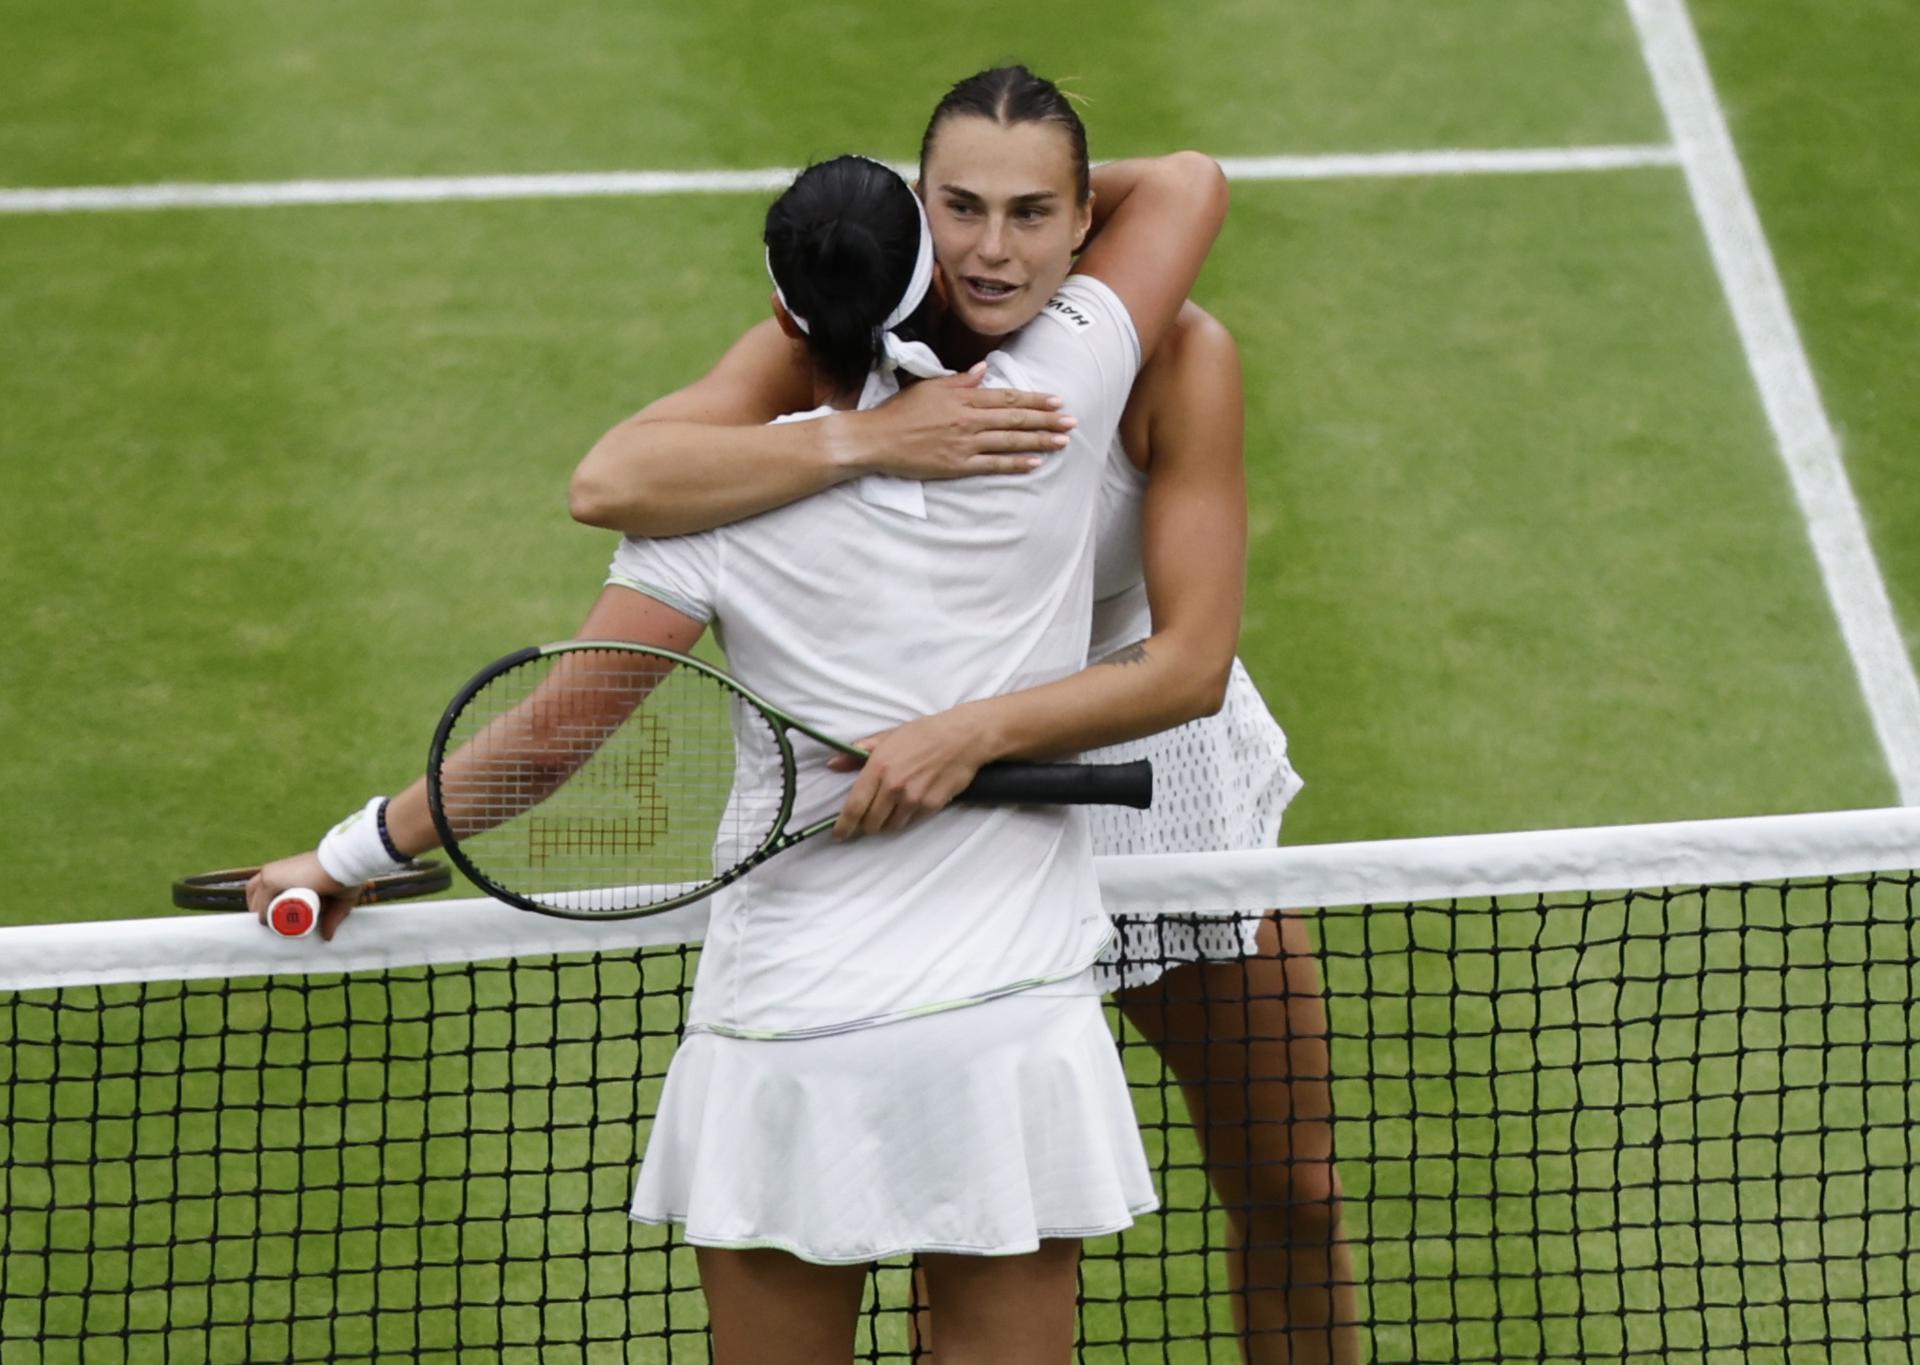 Belarusian Aryna Sabalenka (facing the camera) congratulates Tunisia's Ons Jabeur at the net after losing their Wimbledon women's singles semifinal 6-7 (5-7), 6-4, 6-3 on 13 July 2023 in London, United Kingdom. EFE/EPA/ISABEL INFANTES
